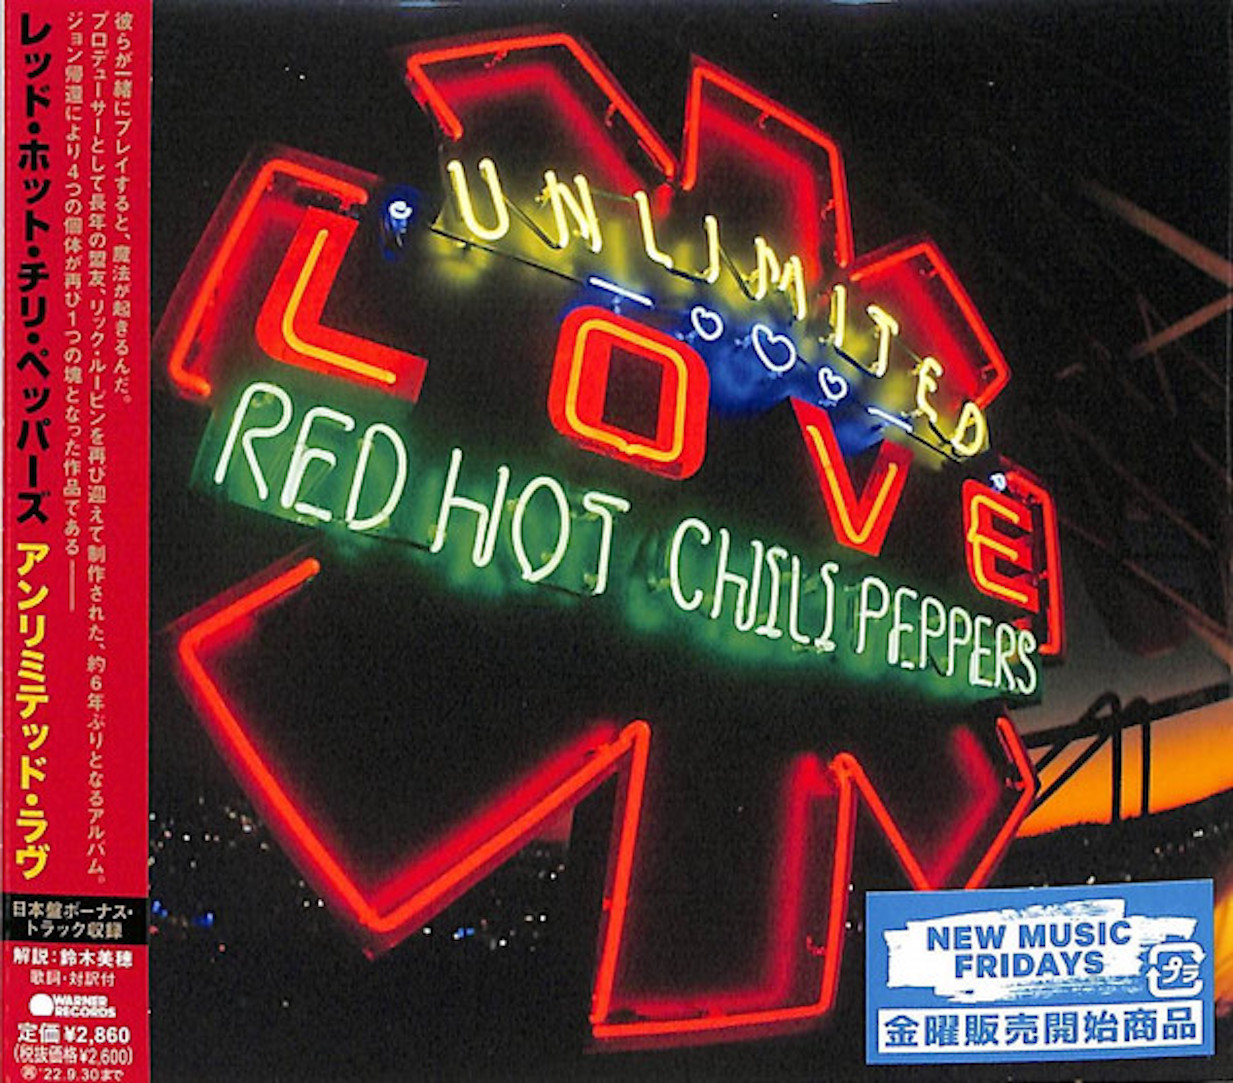 Red hot chili peppers love. Red hot Chili Peppers Unlimited Love. Red hot Chili Peppers 2022. Red hot Chili Peppers Unlimited Love 2022 обложка. Red hot Chili Peppers Unlimited Love album Cover.